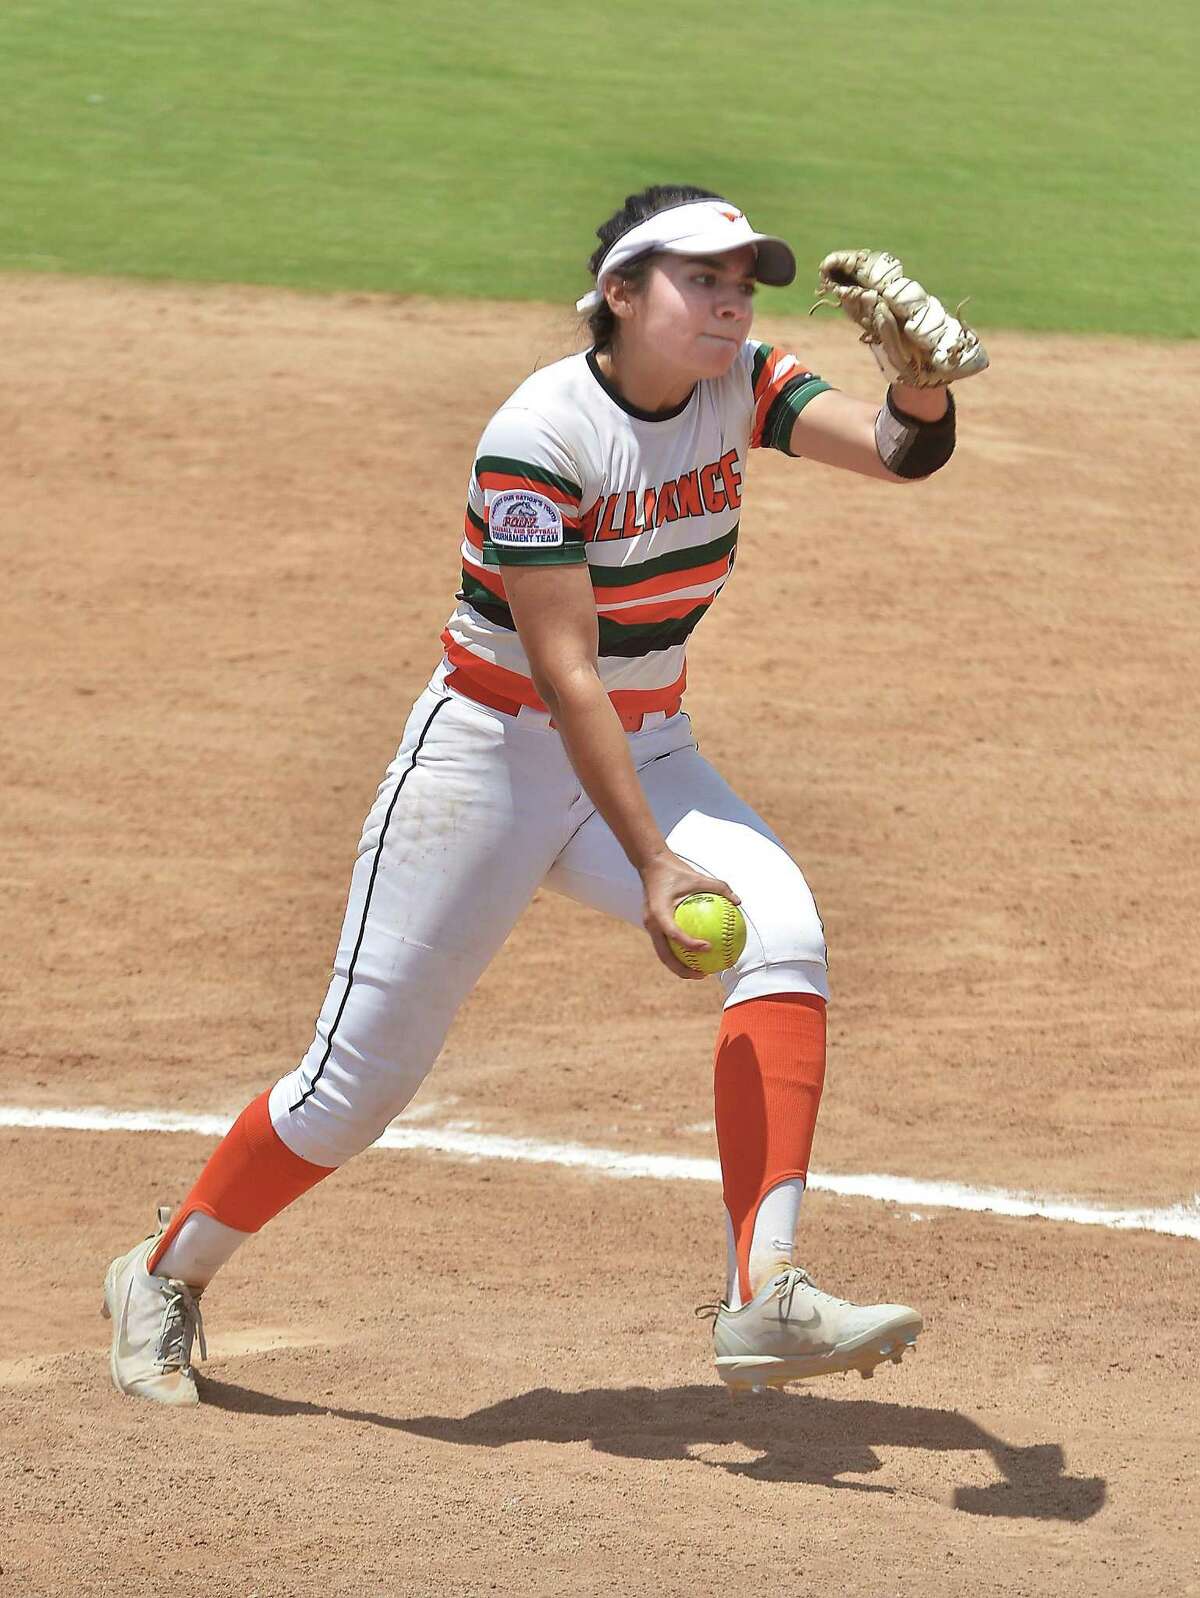 Pitcher Evelyn Gonzalez and the 18U Laredo Alliance won 15-0 over the Forth Worth White Sox and 12-0 against the Kingsville Thunder Wednesday at the SAC.